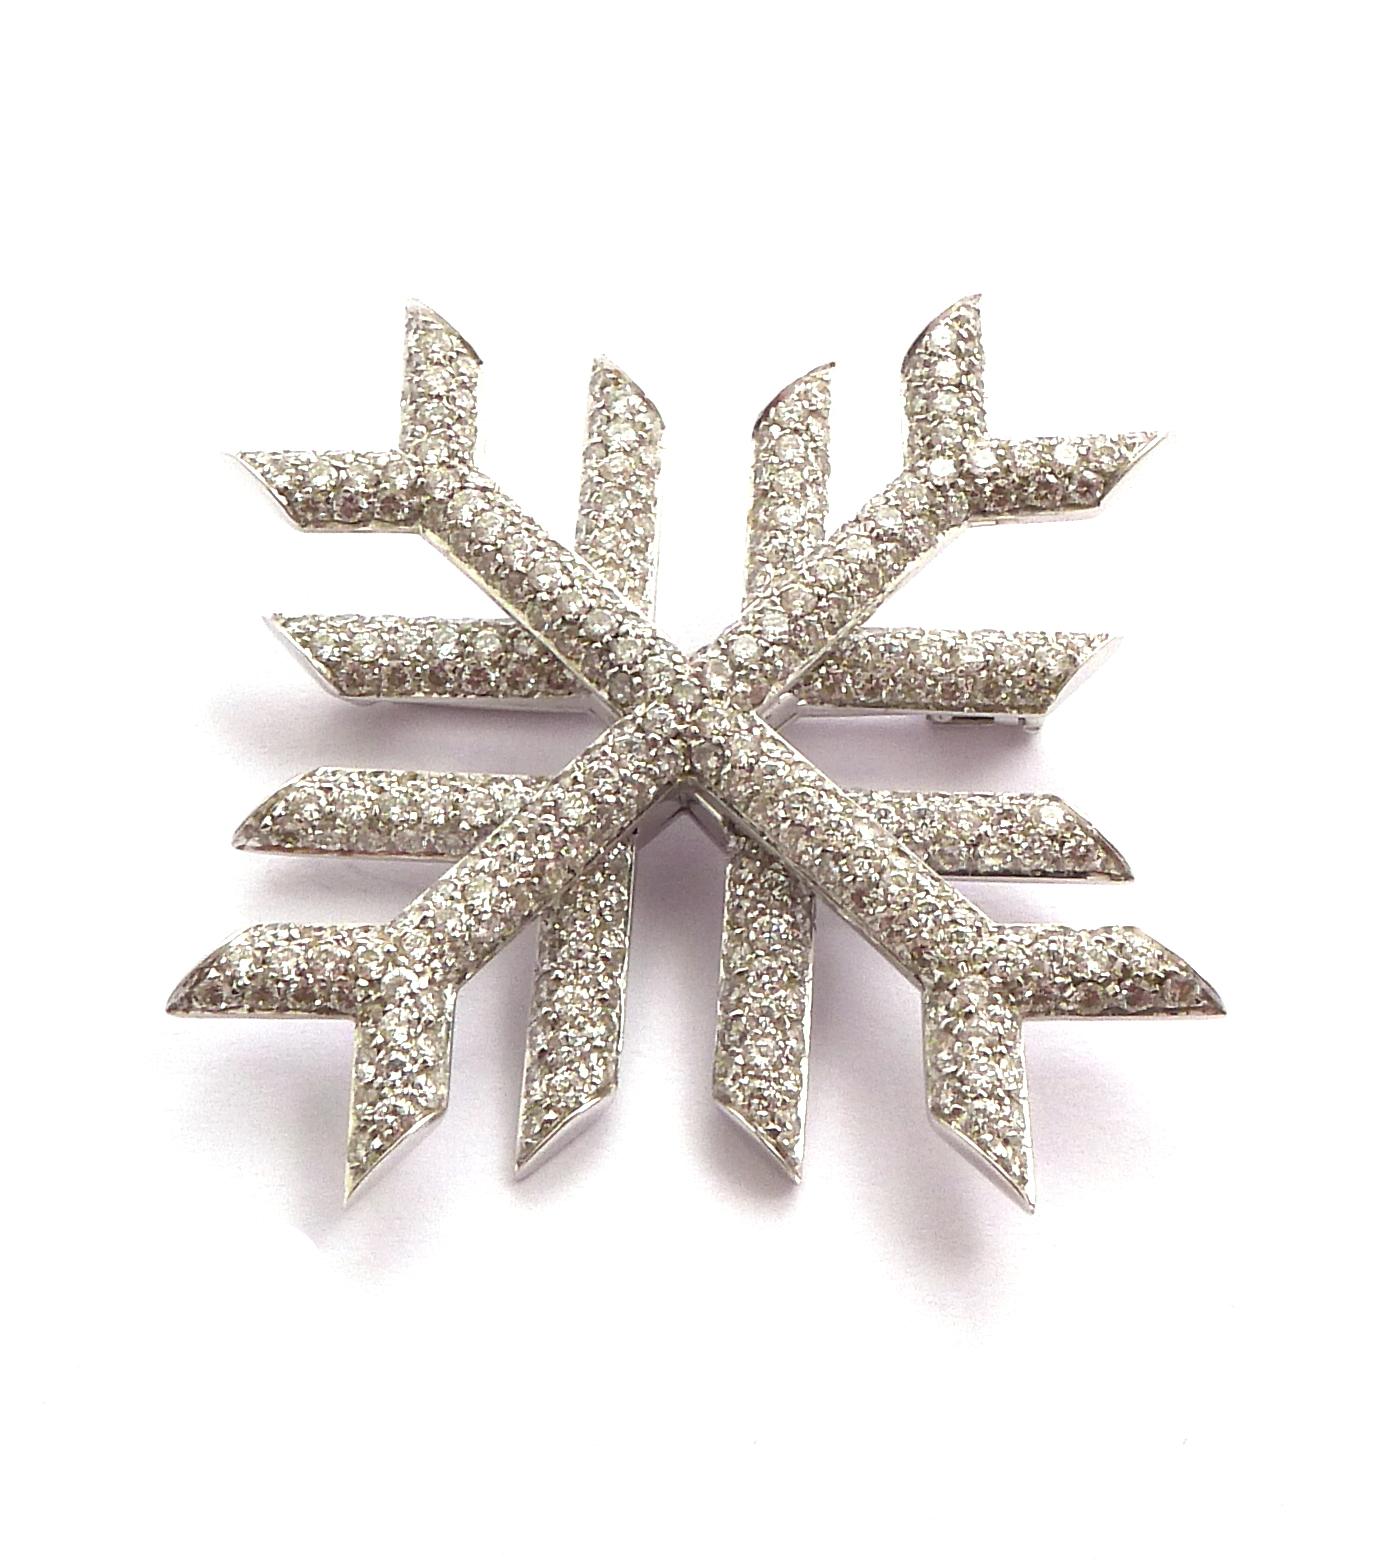 Designed as a full pavé-set brilliant cut diamond broocha and can be worn as a pendant. 

Mounted in 18k white gold

- Diamonds, TW - VVS: 5.85 cts total
- Gold weight: 22.13 grs
